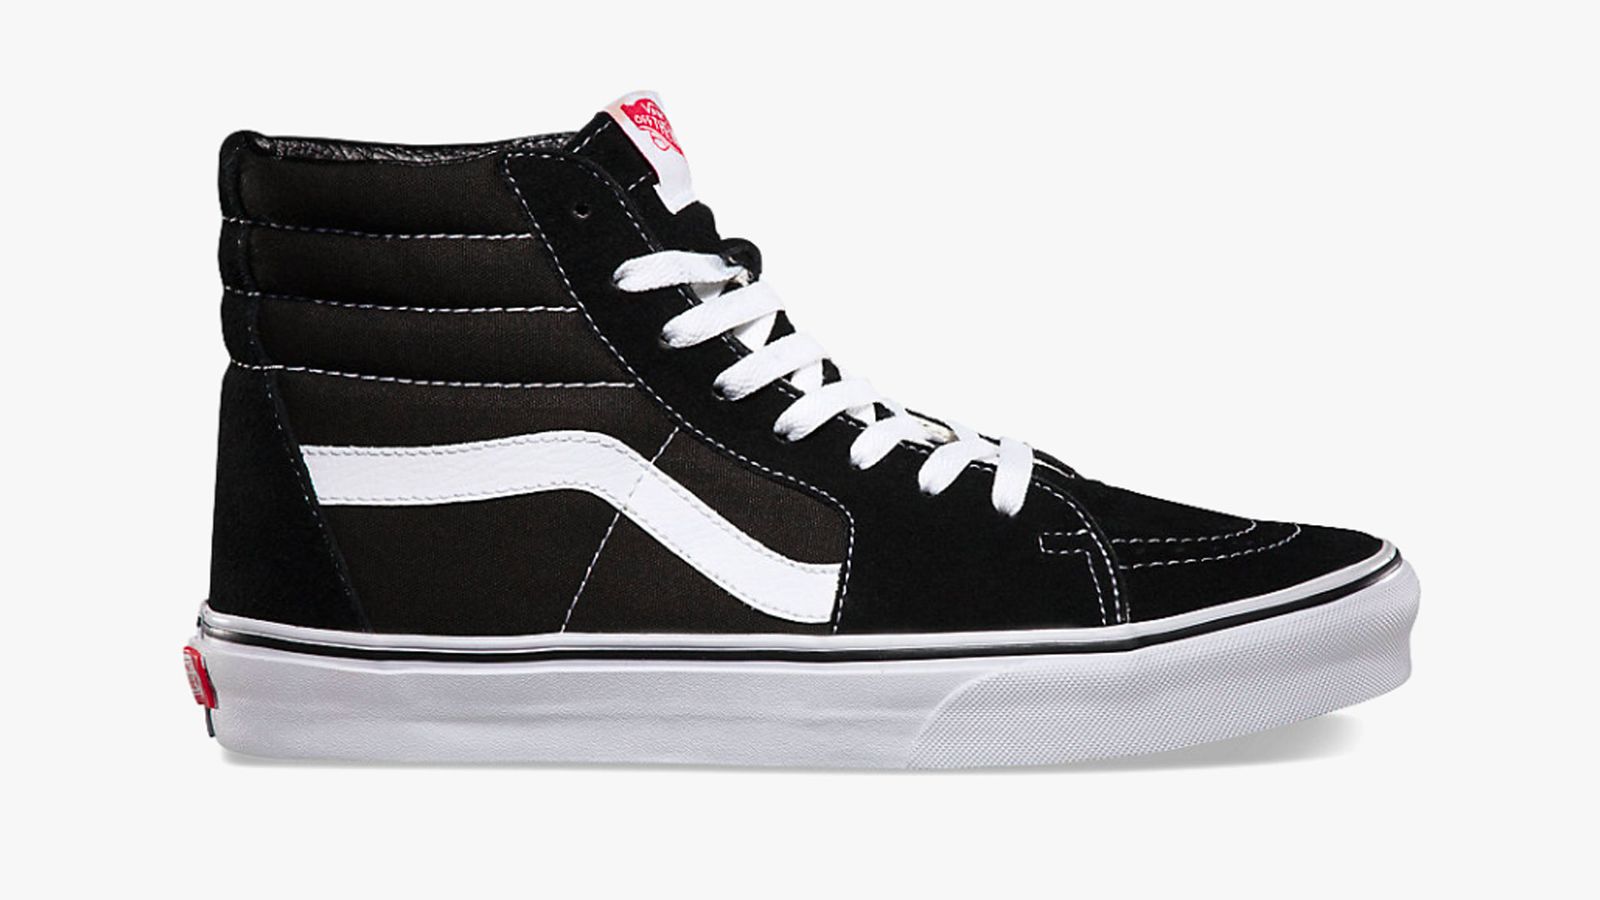 Vans Sk8-Hi product image of a black and white high-top sneaker.